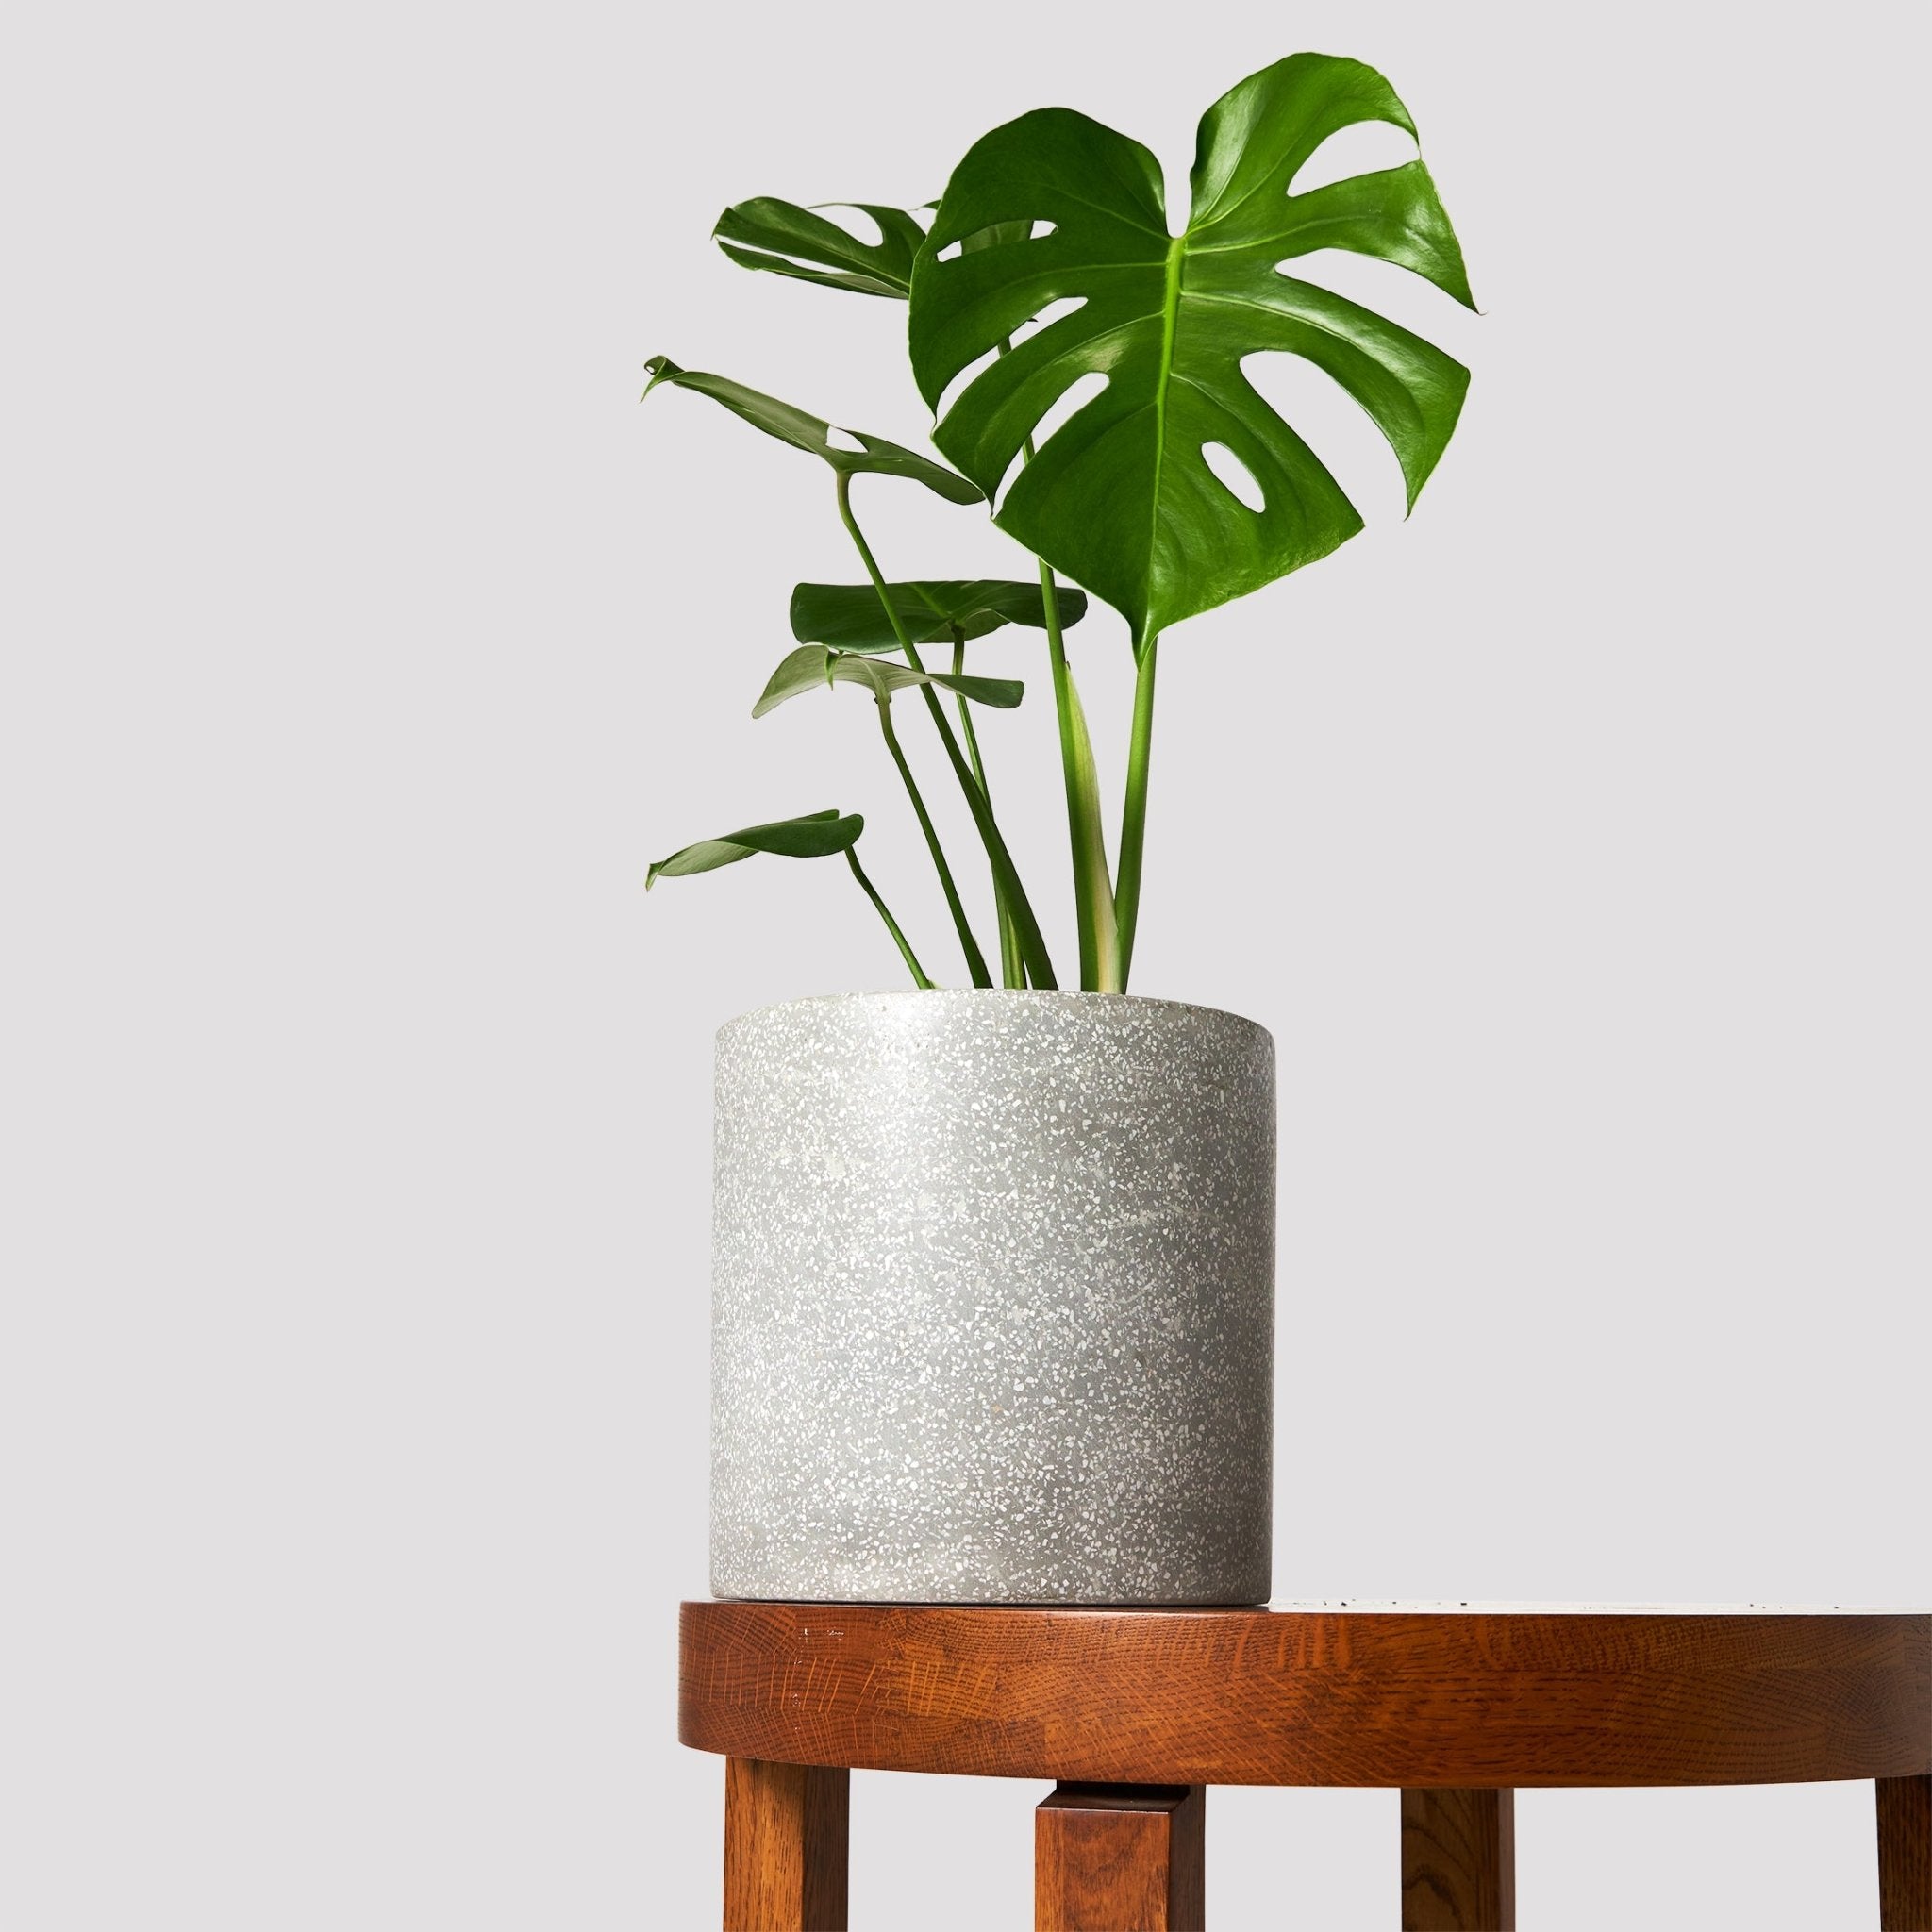 Monstera Deliciosa Indoor Plant from The Good Plant Co